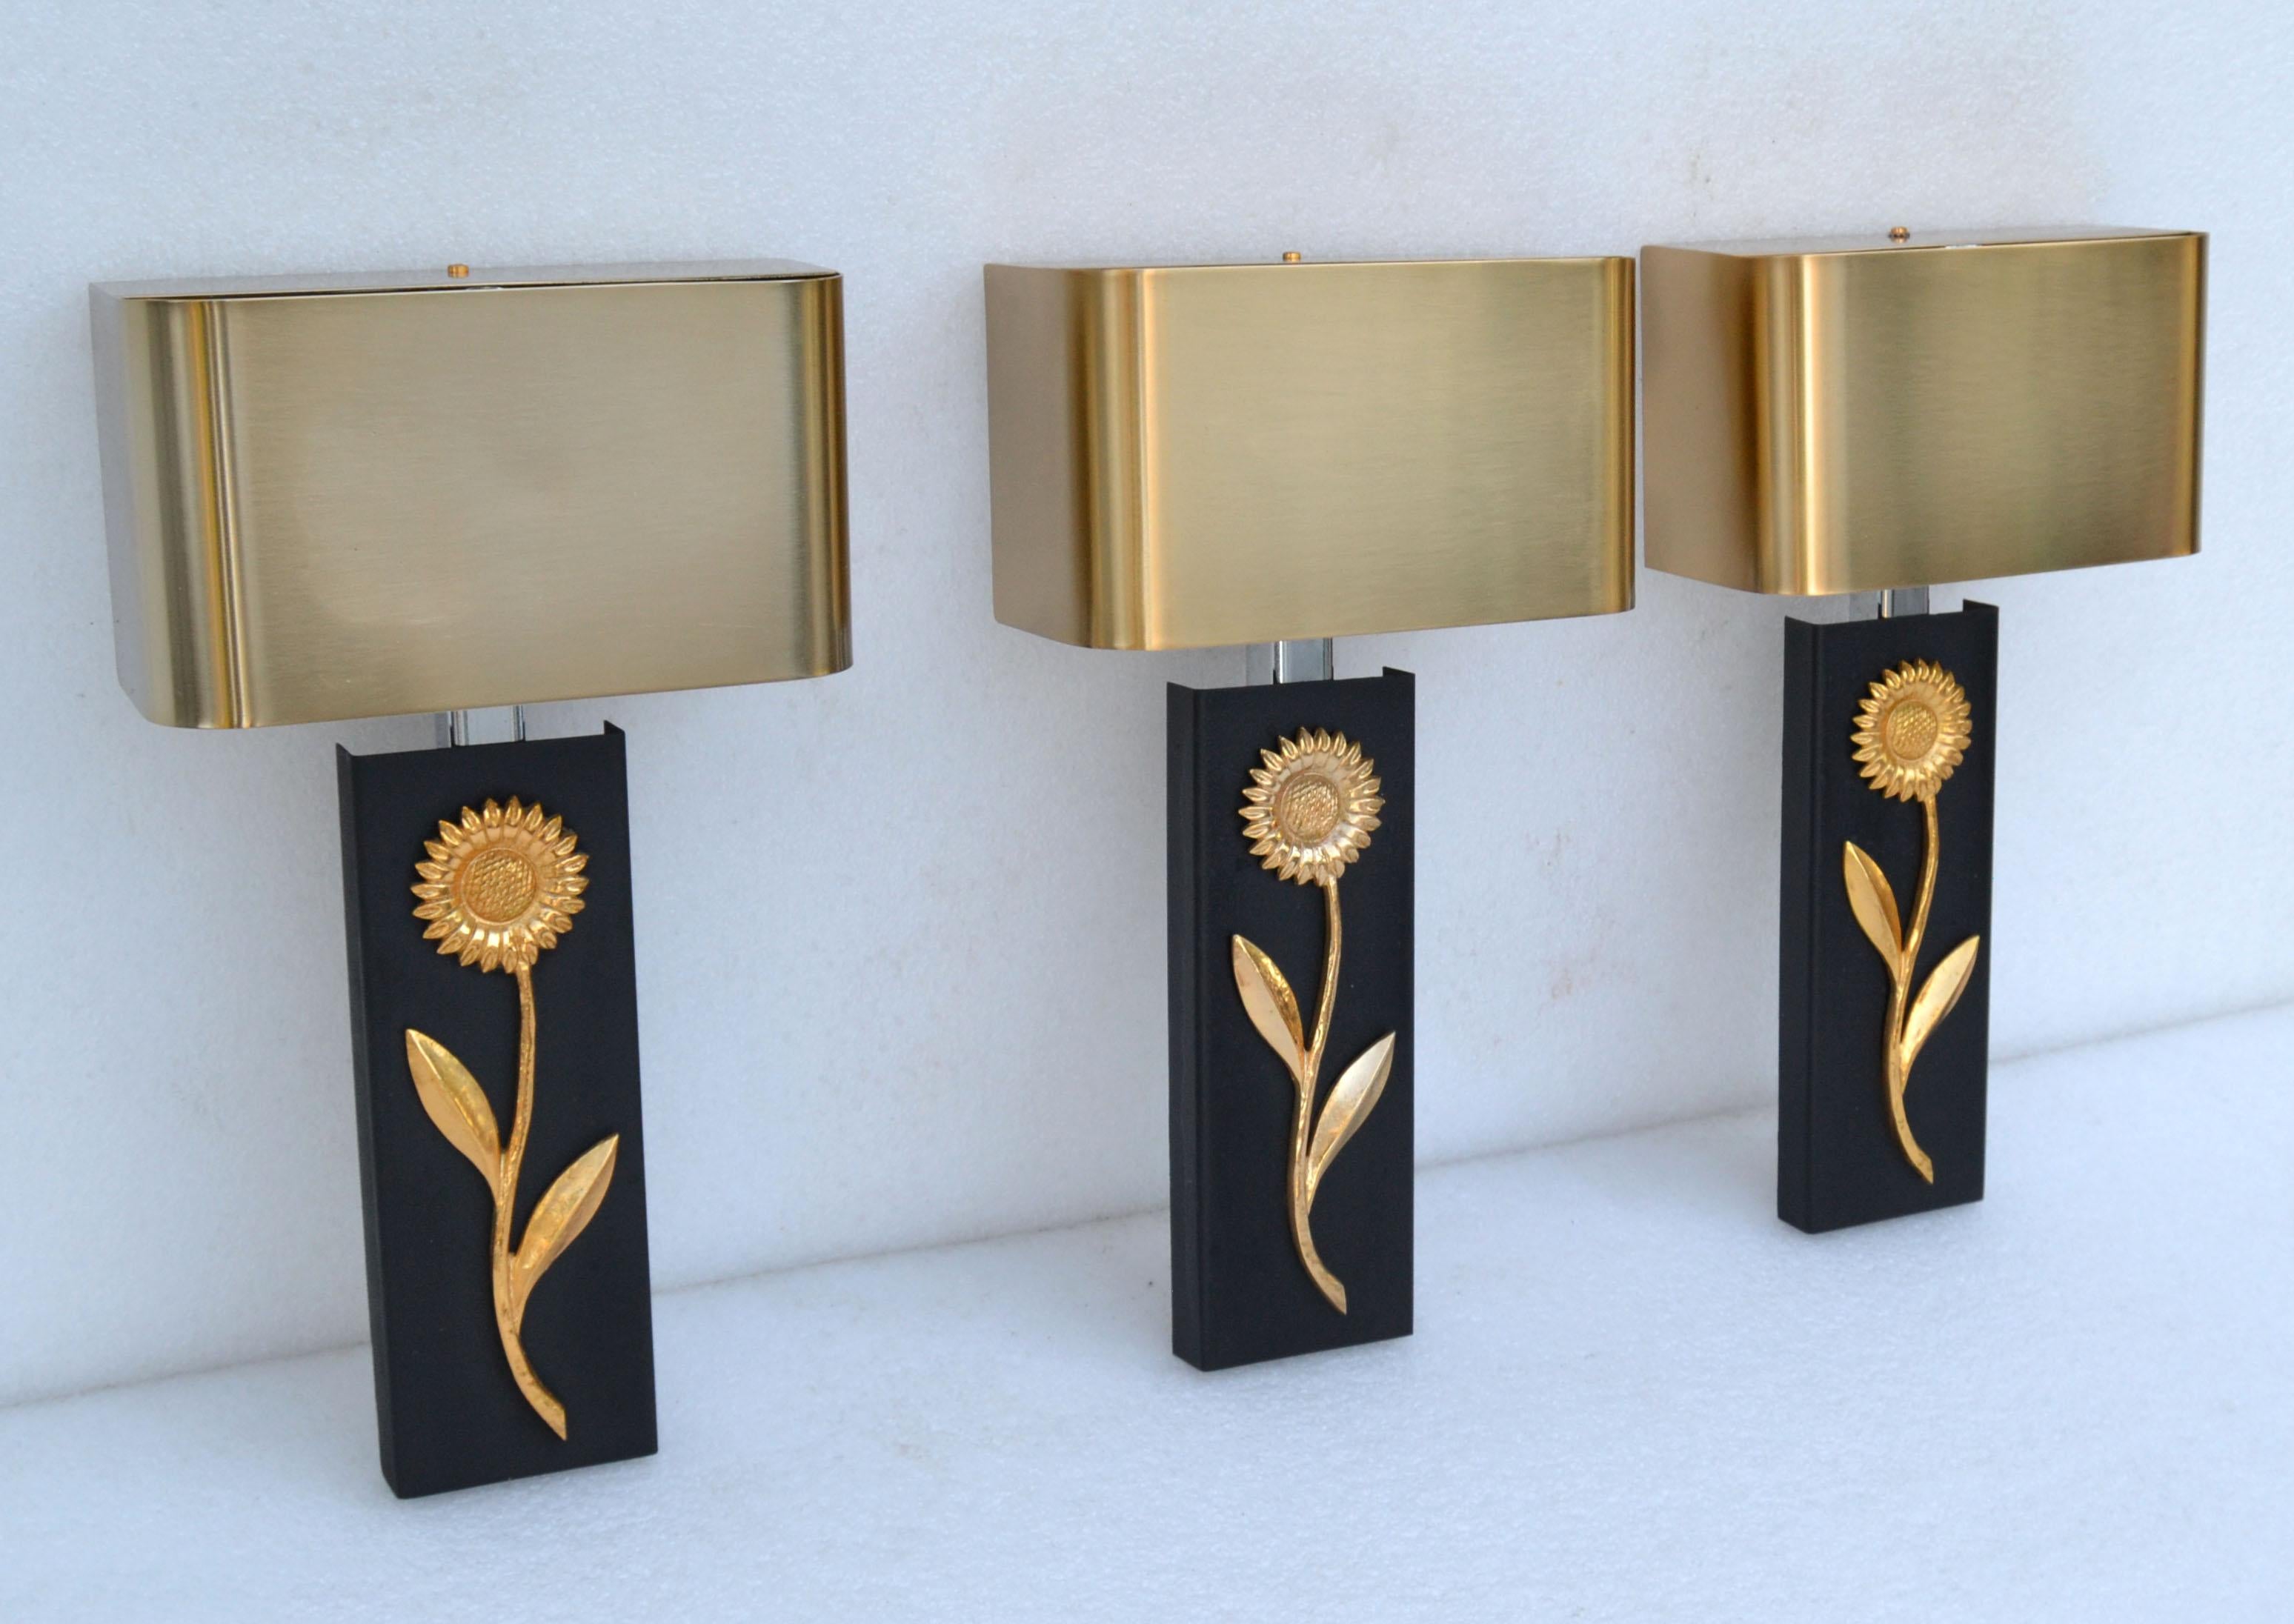 3 Maison Charles Bronze, Brass & Steel Sconces, Wall Lights Brushed Brass Shades 1